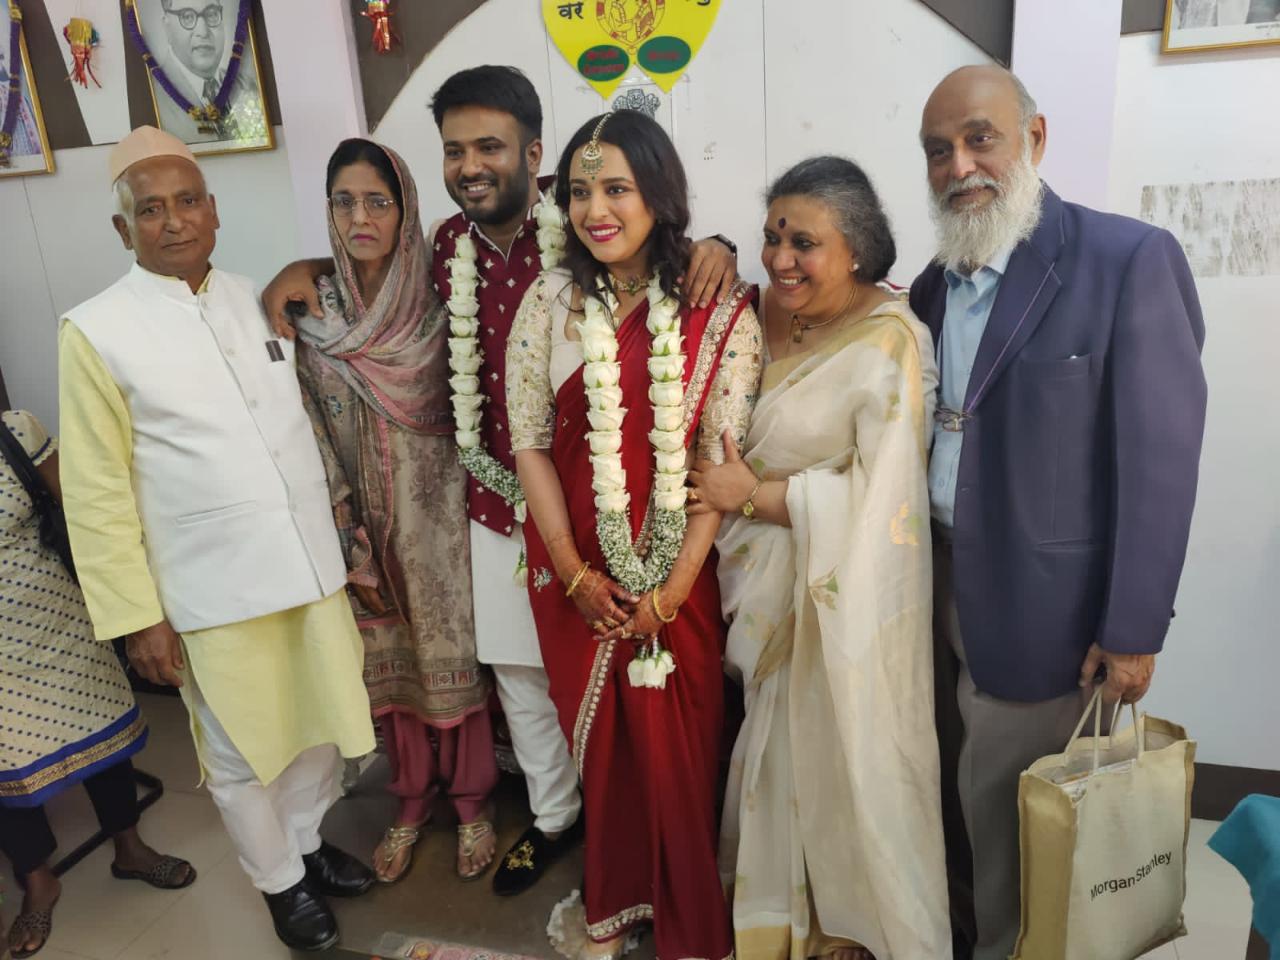 On Thursday evening, Swara Bhasker took to her social media to share the happy news of her marriage. She announced that she tied the knot with Fahad Ahmad, a political activist